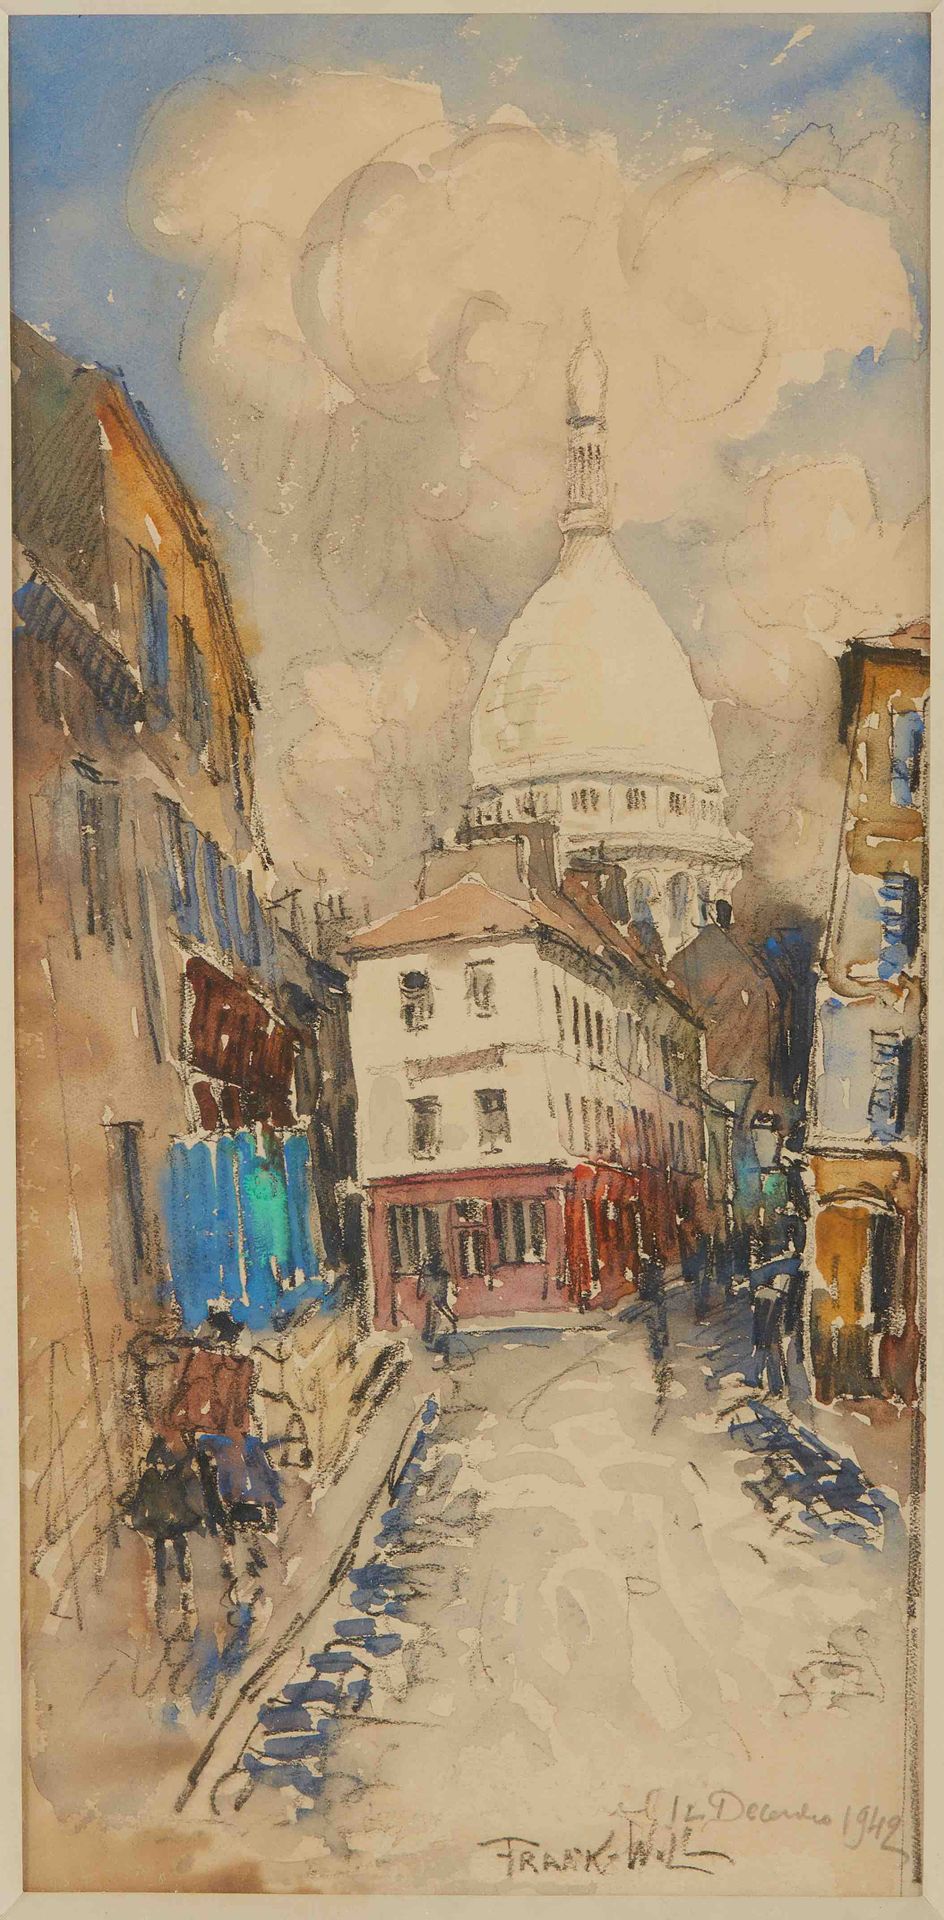 Null FRANK-WILL (1900-1951)

Montmartre

Watercolor on paper signed on the lower&hellip;